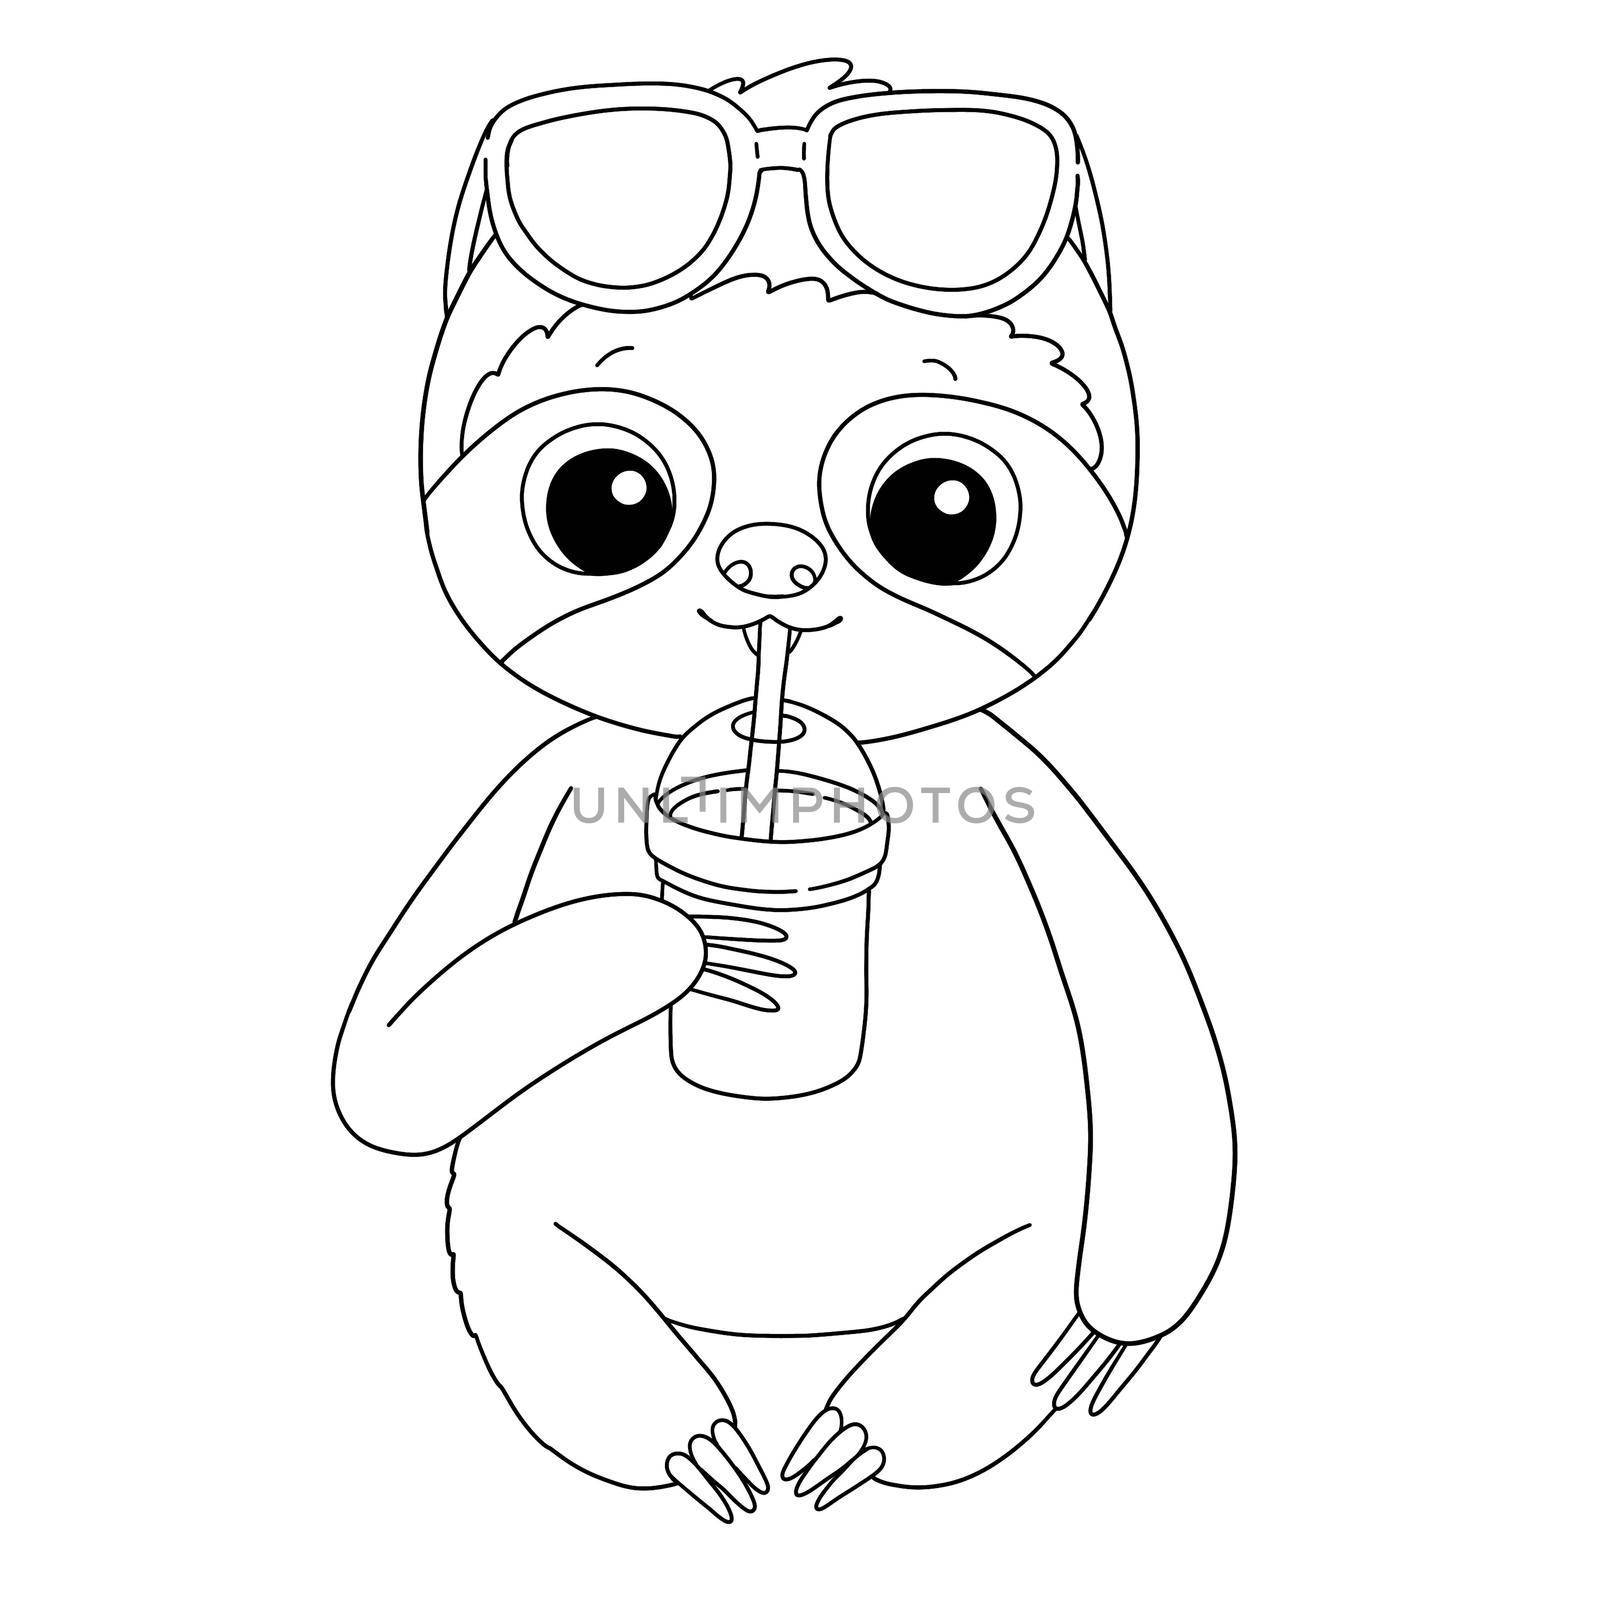 Sloth in sun glasses with smoothie drink summer coloring page illustration